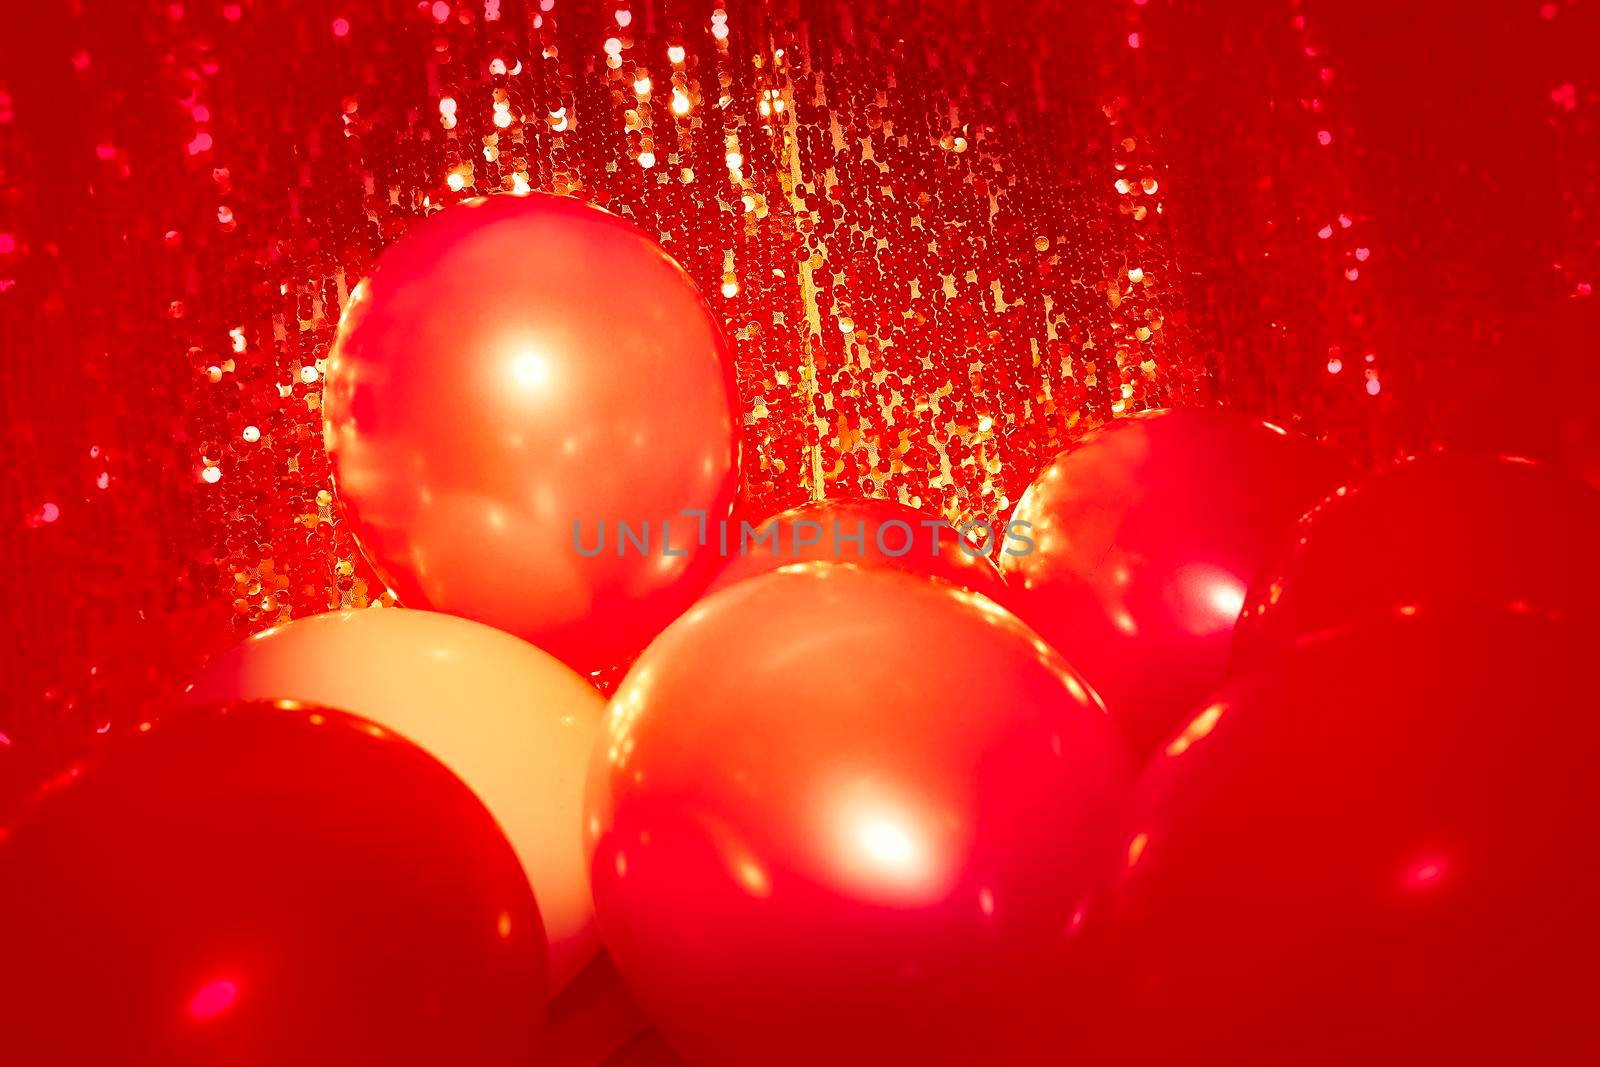 Red world. Red balloons on a red background by jovani68